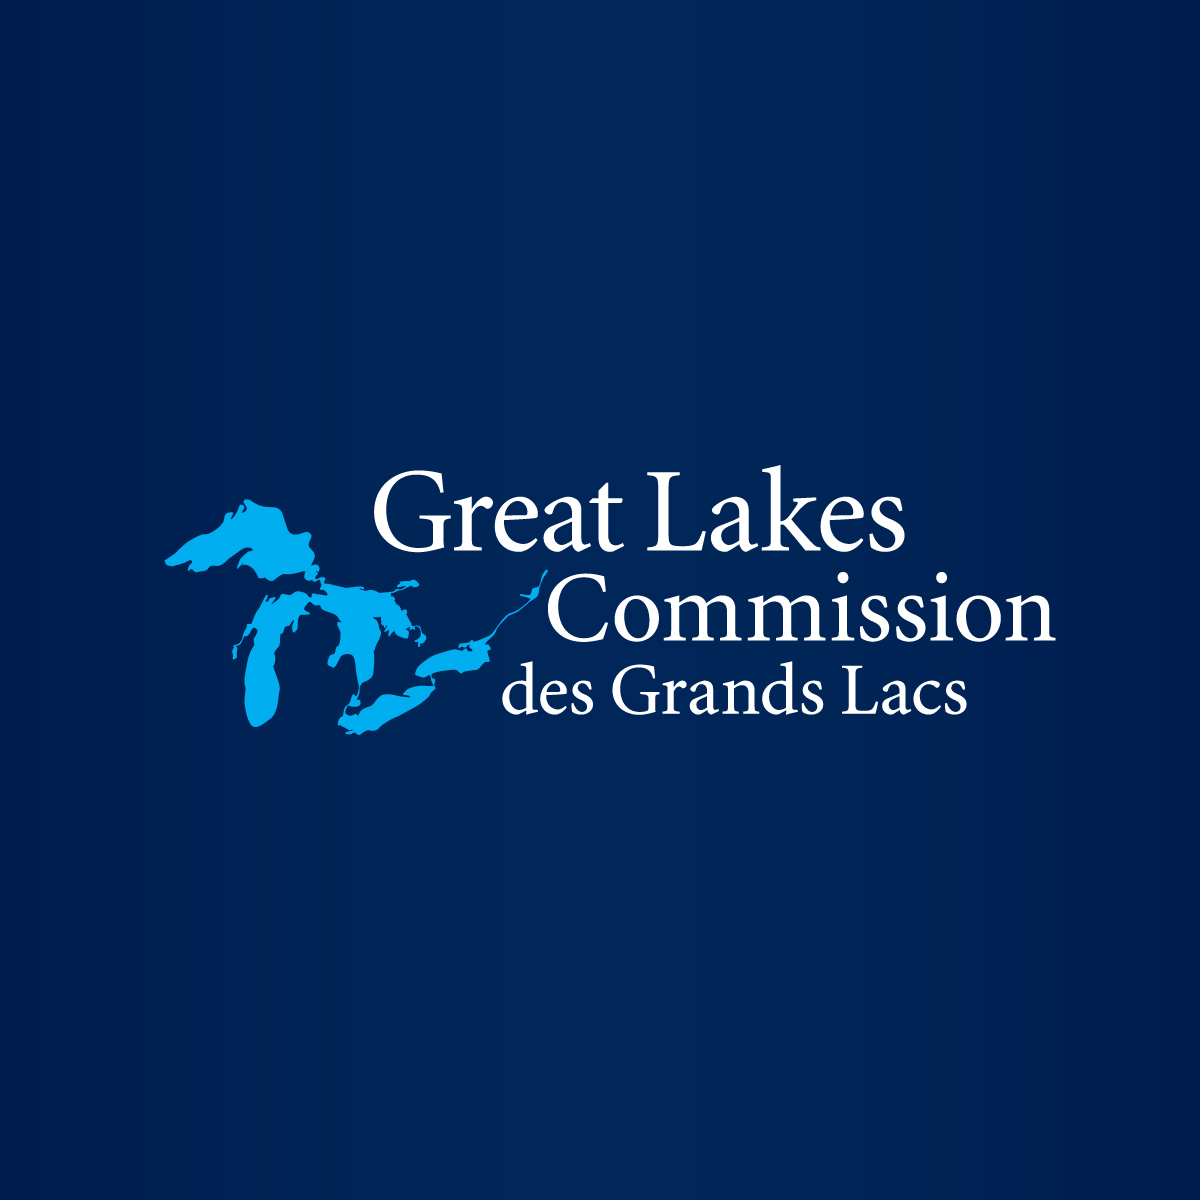 great lakes coalition hosts annual meeting in august